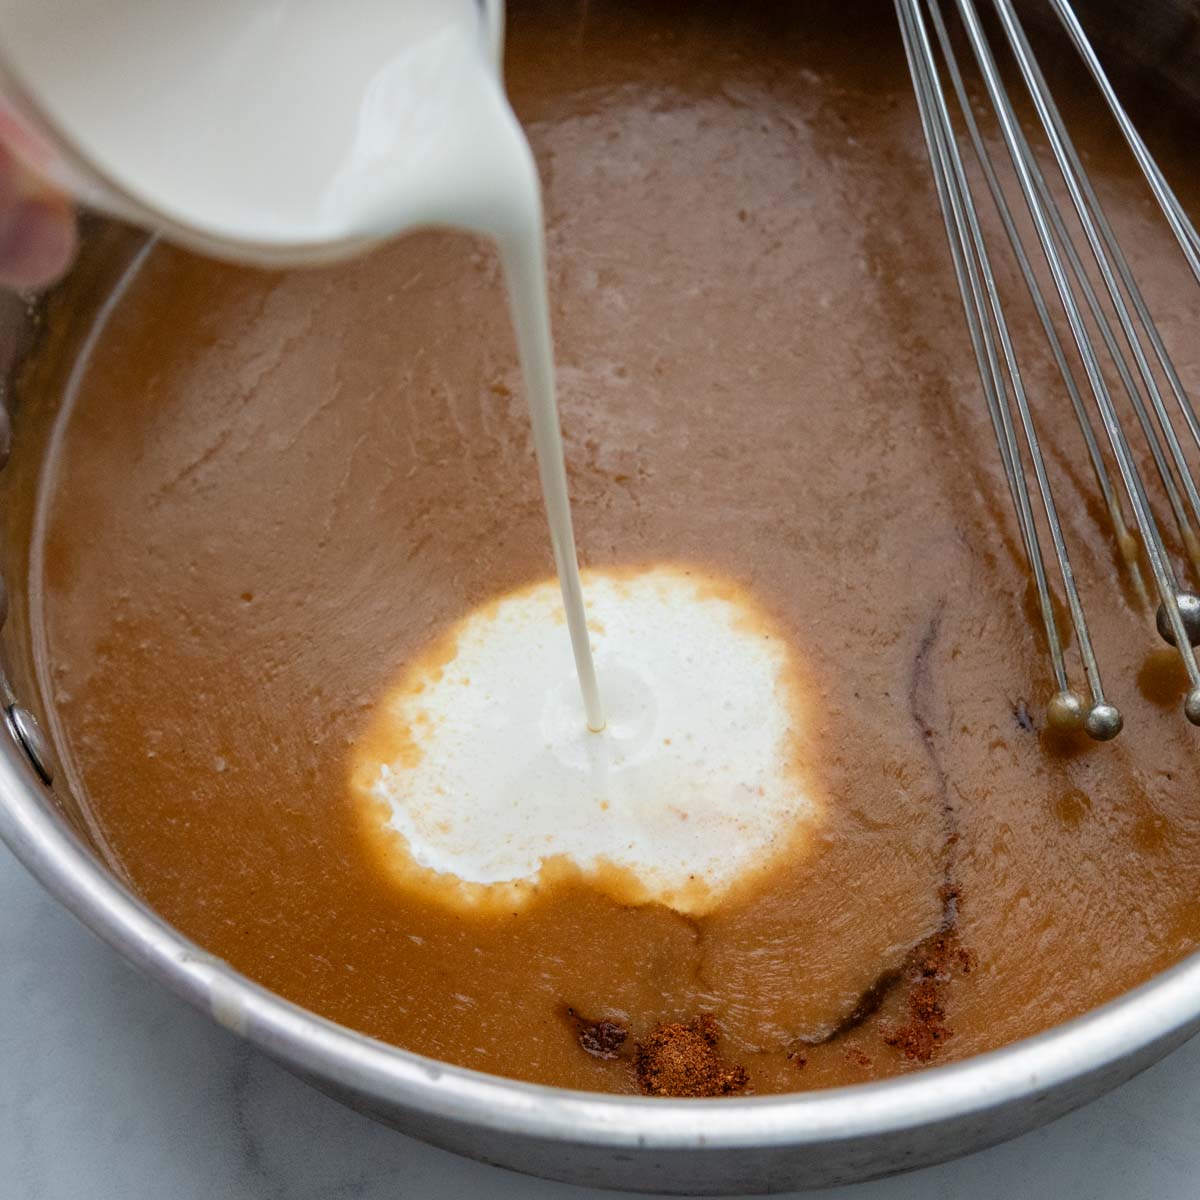 cream being poured into the gravy.